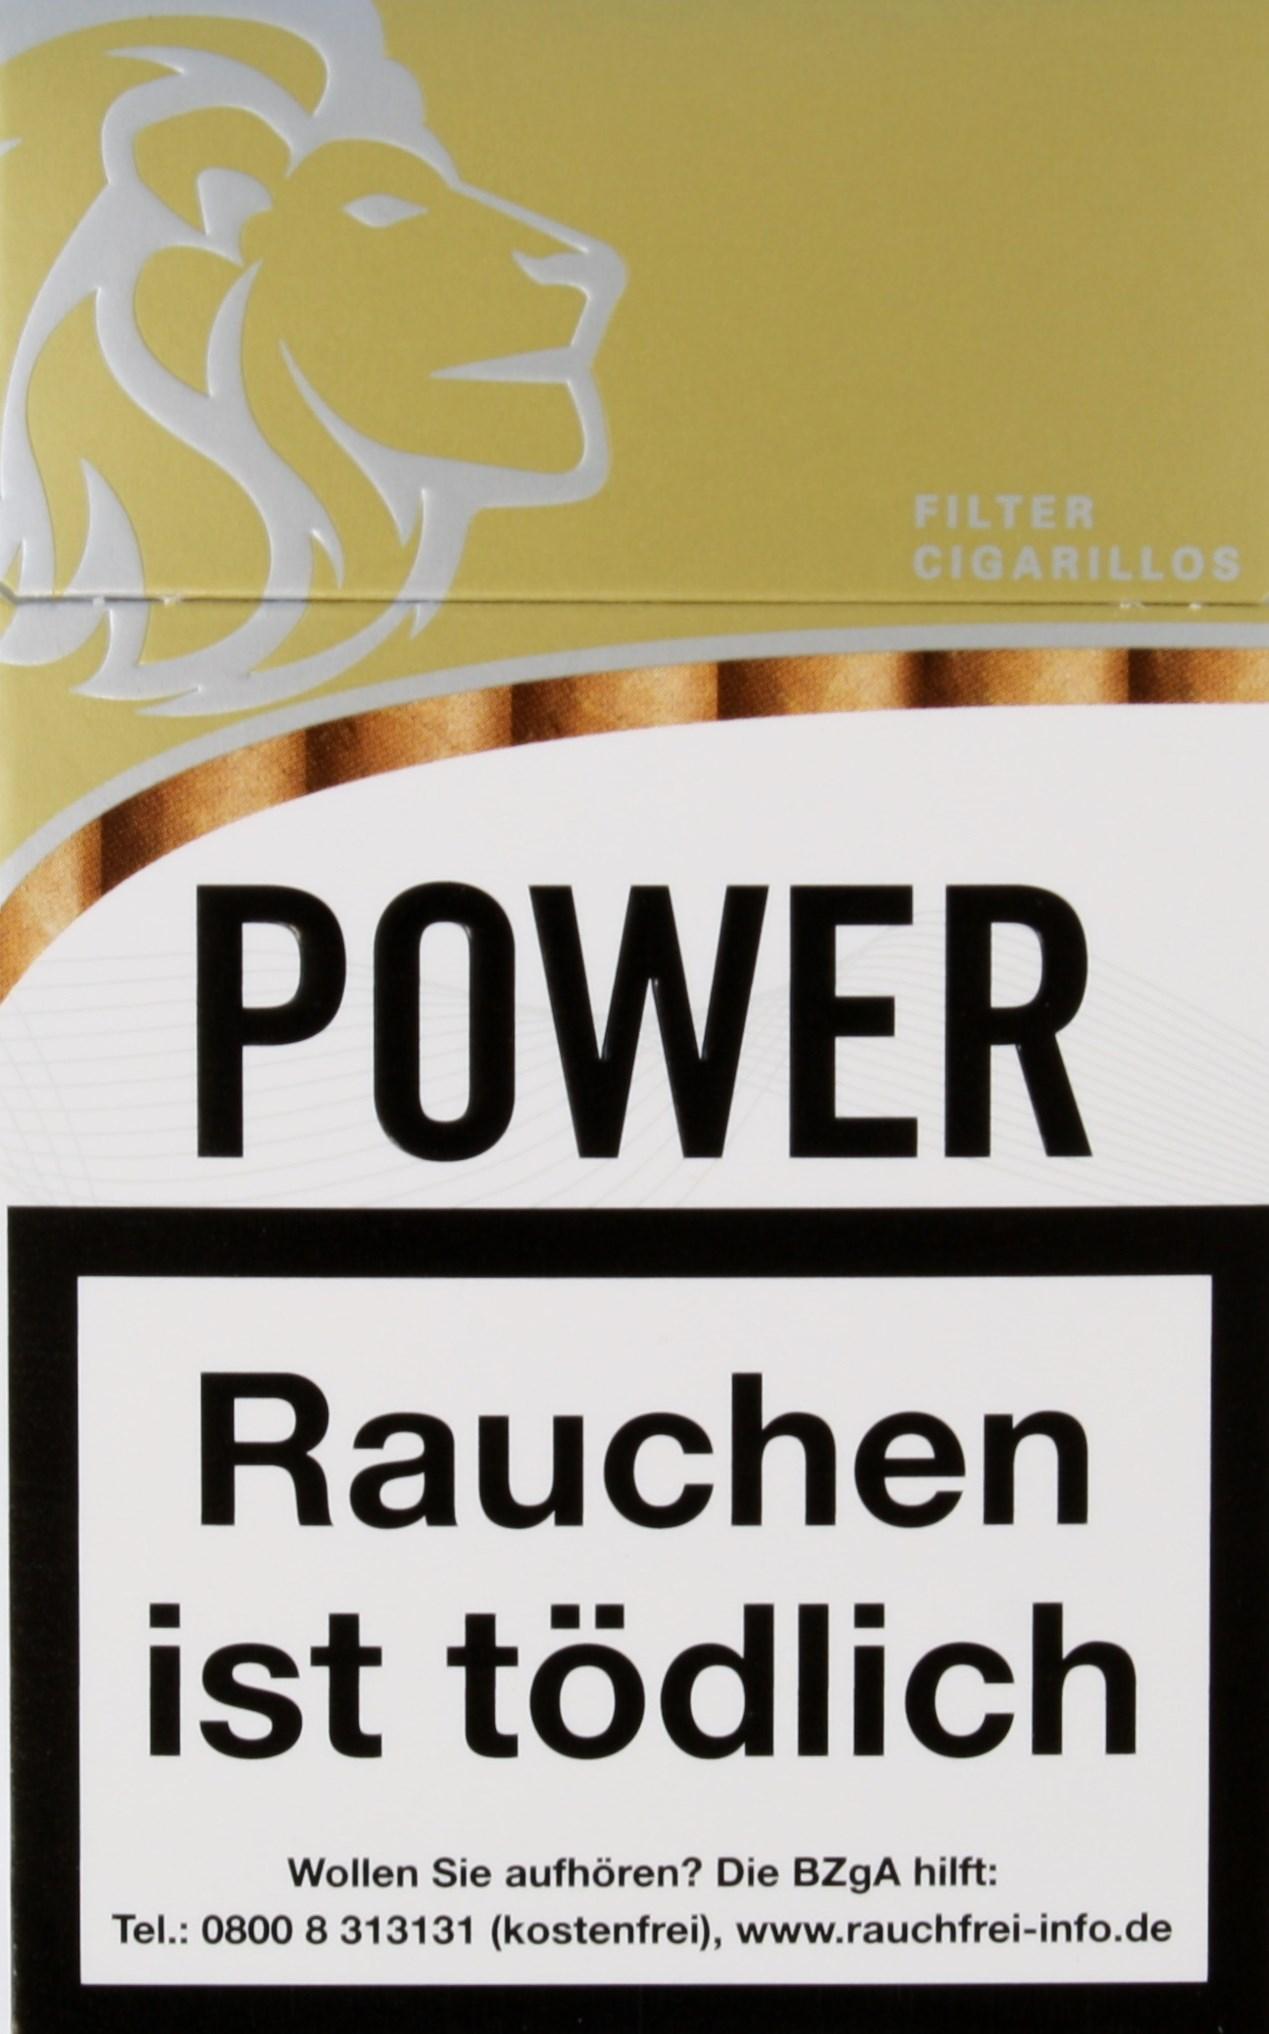 Power Gold Filter Zigarillos 1 Packung